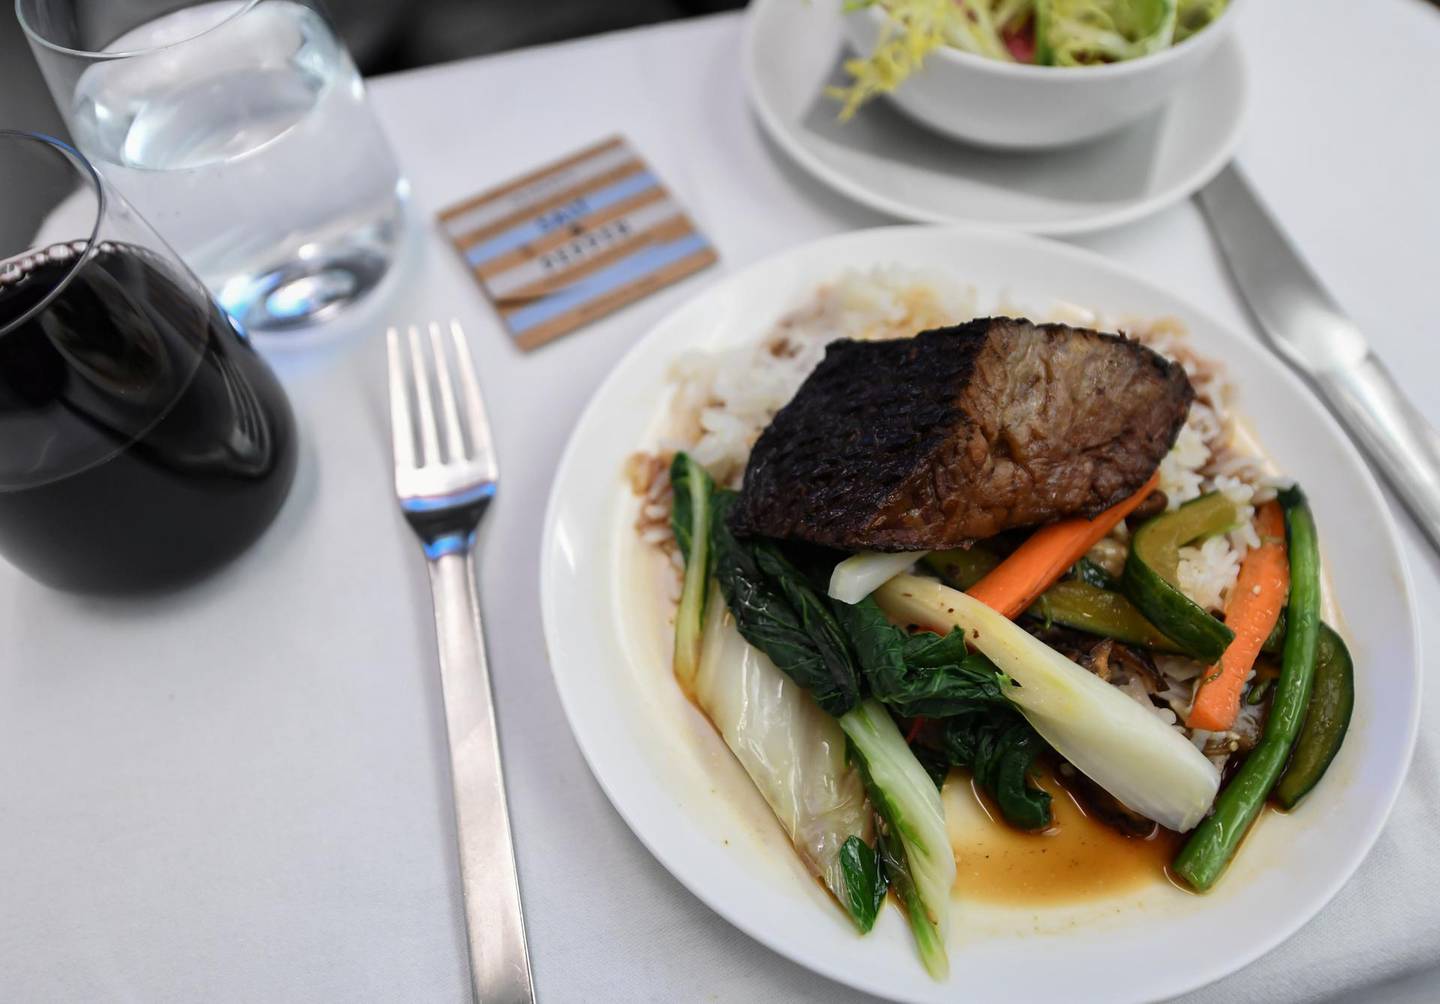 Passengers on the world's longest commercial flight by distance will eat supper at breakfast time. Courtesy Qantas